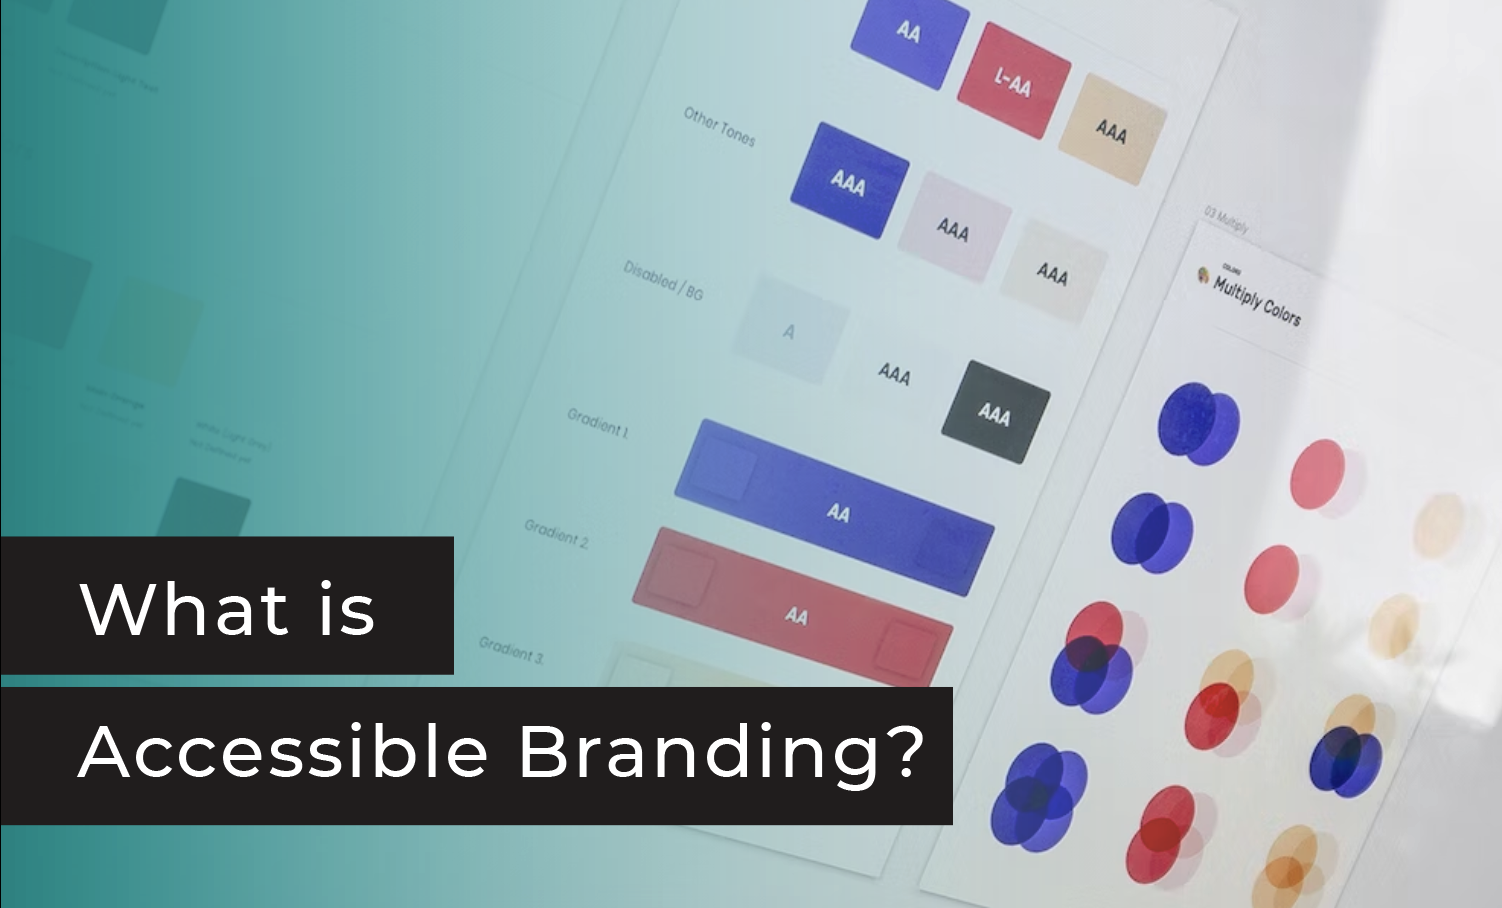 What is accessible branding with an accessibility checker shown behind it.